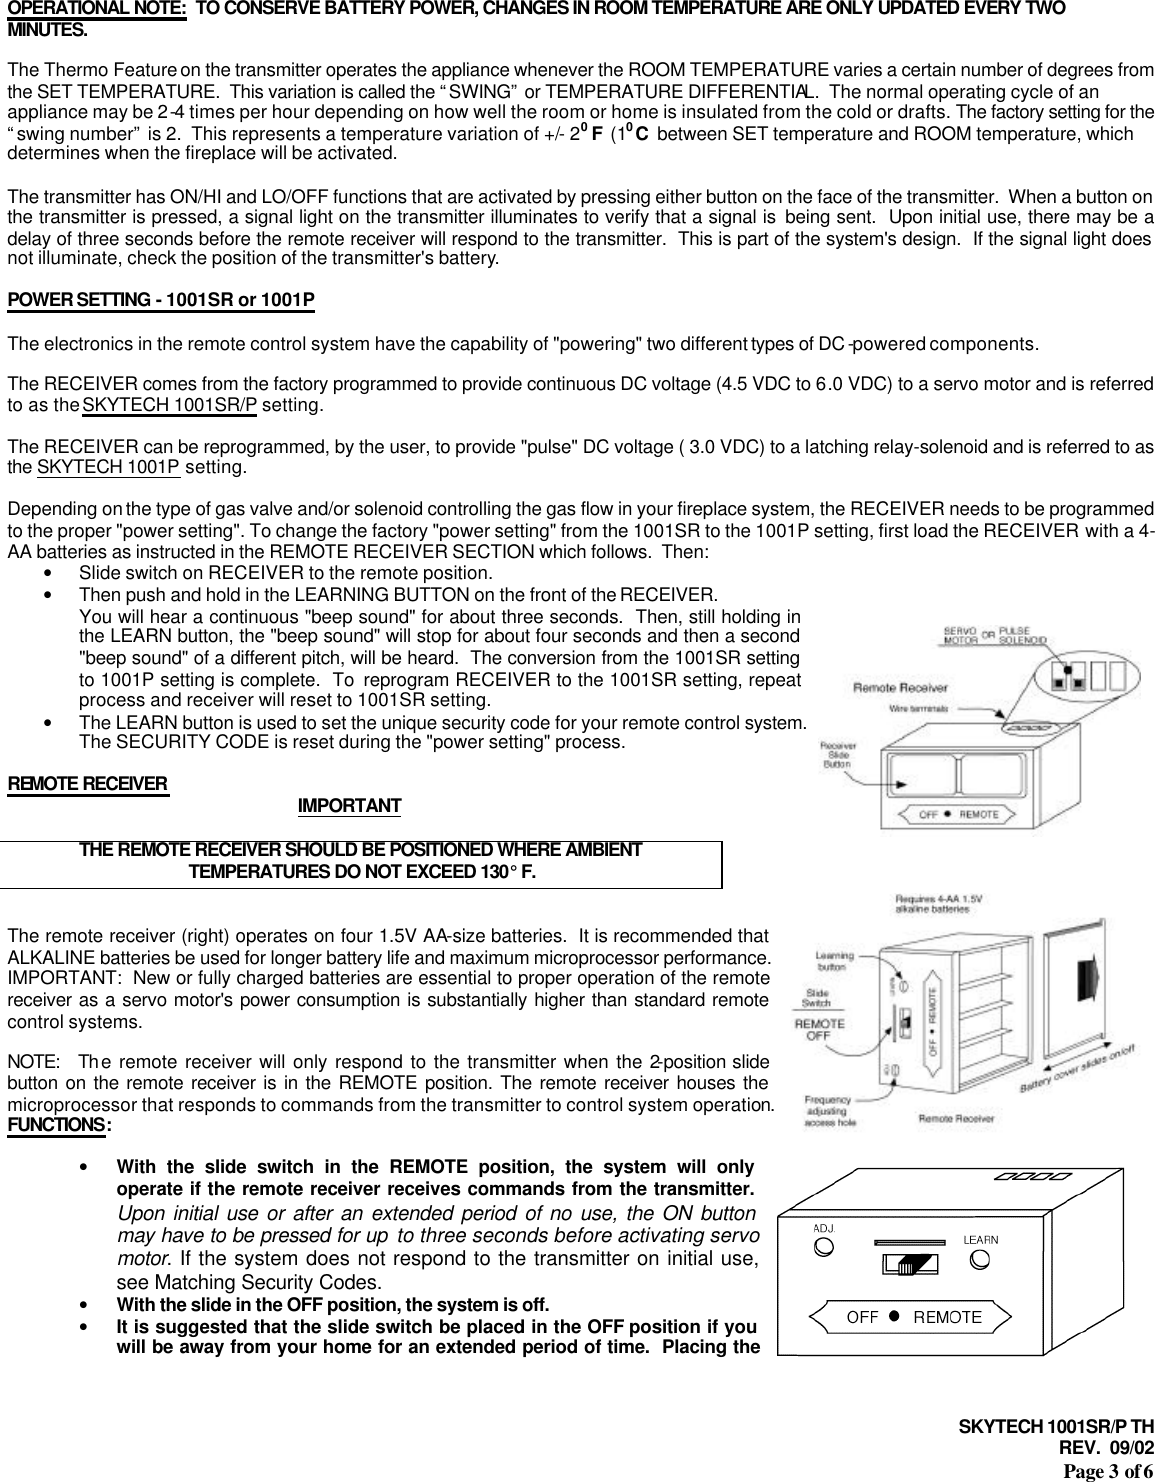 SKYTECH 1001SR/P TH REV.  09/02 Page 3 of 6   OPERATIONAL NOTE:  TO CONSERVE BATTERY POWER, CHANGES IN ROOM TEMPERATURE ARE ONLY UPDATED EVERY TWO MINUTES.  The Thermo Feature on the transmitter operates the appliance whenever the ROOM TEMPERATURE varies a certain number of degrees from the SET TEMPERATURE.  This variation is called the “SWING” or TEMPERATURE DIFFERENTIAL.  The normal operating cycle of an appliance may be 2-4 times per hour depending on how well the room or home is insulated from the cold or drafts. The factory setting for the “swing number” is 2.  This represents a temperature variation of +/- 20 F  (10 C  between SET temperature and ROOM temperature, which determines when the fireplace will be activated.   The transmitter has ON/HI and LO/OFF functions that are activated by pressing either button on the face of the transmitter.  When a button on the transmitter is pressed, a signal light on the transmitter illuminates to verify that a signal is  being sent.  Upon initial use, there may be a delay of three seconds before the remote receiver will respond to the transmitter.  This is part of the system&apos;s design.  If the signal light does not illuminate, check the position of the transmitter&apos;s battery.  POWER SETTING - 1001SR or 1001P  The electronics in the remote control system have the capability of &quot;powering&quot; two different types of DC -powered components.  The RECEIVER comes from the factory programmed to provide continuous DC voltage (4.5 VDC to 6.0 VDC) to a servo motor and is referred to as the SKYTECH 1001SR/P setting.  The RECEIVER can be reprogrammed, by the user, to provide &quot;pulse&quot; DC voltage ( 3.0 VDC) to a latching relay-solenoid and is referred to as the SKYTECH 1001P setting.  Depending on the type of gas valve and/or solenoid controlling the gas flow in your fireplace system, the RECEIVER needs to be programmed to the proper &quot;power setting&quot;. To change the factory &quot;power setting&quot; from the 1001SR to the 1001P setting, first load the RECEIVER with a 4-AA batteries as instructed in the REMOTE RECEIVER SECTION which follows.  Then:  • Slide switch on RECEIVER to the remote position. • Then push and hold in the LEARNING BUTTON on the front of the RECEIVER.  You will hear a continuous &quot;beep sound&quot; for about three seconds.  Then, still holding in the LEARN button, the &quot;beep sound&quot; will stop for about four seconds and then a second &quot;beep sound&quot; of a different pitch, will be heard.  The conversion from the 1001SR setting to 1001P setting is complete.  To  reprogram RECEIVER to the 1001SR setting, repeat process and receiver will reset to 1001SR setting. • The LEARN button is used to set the unique security code for your remote control system.  The SECURITY CODE is reset during the &quot;power setting&quot; process.  REMOTE RECEIVER  IMPORTANT  THE REMOTE RECEIVER SHOULD BE POSITIONED WHERE AMBIENT TEMPERATURES DO NOT EXCEED 130° F.   The remote receiver (right) operates on four 1.5V AA-size batteries.  It is recommended that ALKALINE batteries be used for longer battery life and maximum microprocessor performance.  IMPORTANT:  New or fully charged batteries are essential to proper operation of the remote receiver as a servo motor&apos;s power consumption is substantially higher than standard remote control systems.  NOTE:  Th e remote receiver will only respond to the transmitter when the 2-position slide button on the remote receiver is in the REMOTE position. The remote receiver houses the microprocessor that responds to commands from the transmitter to control system operation. FUNCTIONS:  • With the slide switch in the REMOTE position, the system will only operate if the remote receiver receives commands from the transmitter.  Upon initial use or after an extended period of no use, the ON button may have to be pressed for up to three seconds before activating servo motor. If the system does not respond to the transmitter on initial use, see Matching Security Codes. • With the slide in the OFF position, the system is off. • It is suggested that the slide switch be placed in the OFF position if you will be away from your home for an extended period of time.  Placing the 